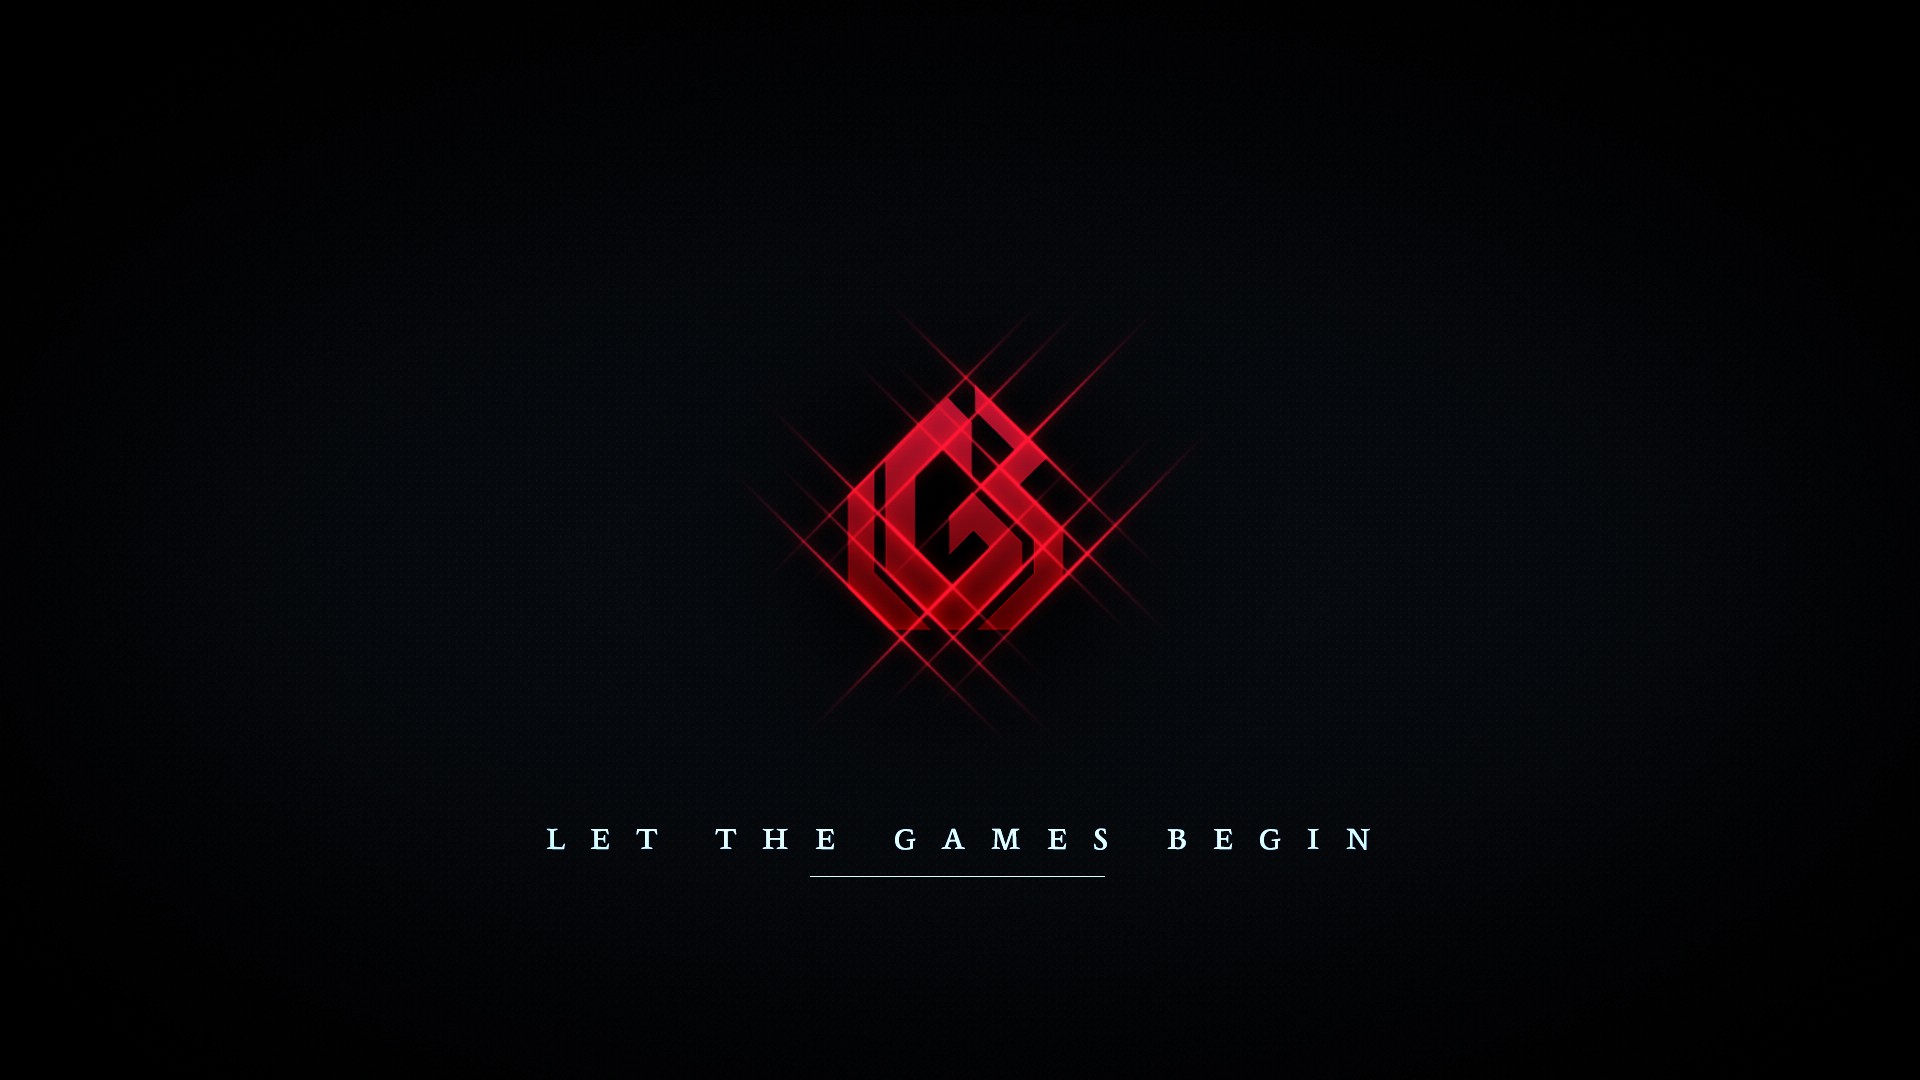 Gamer logo wallpaper by Passion2edit - Download on ZEDGE™ | 0d31